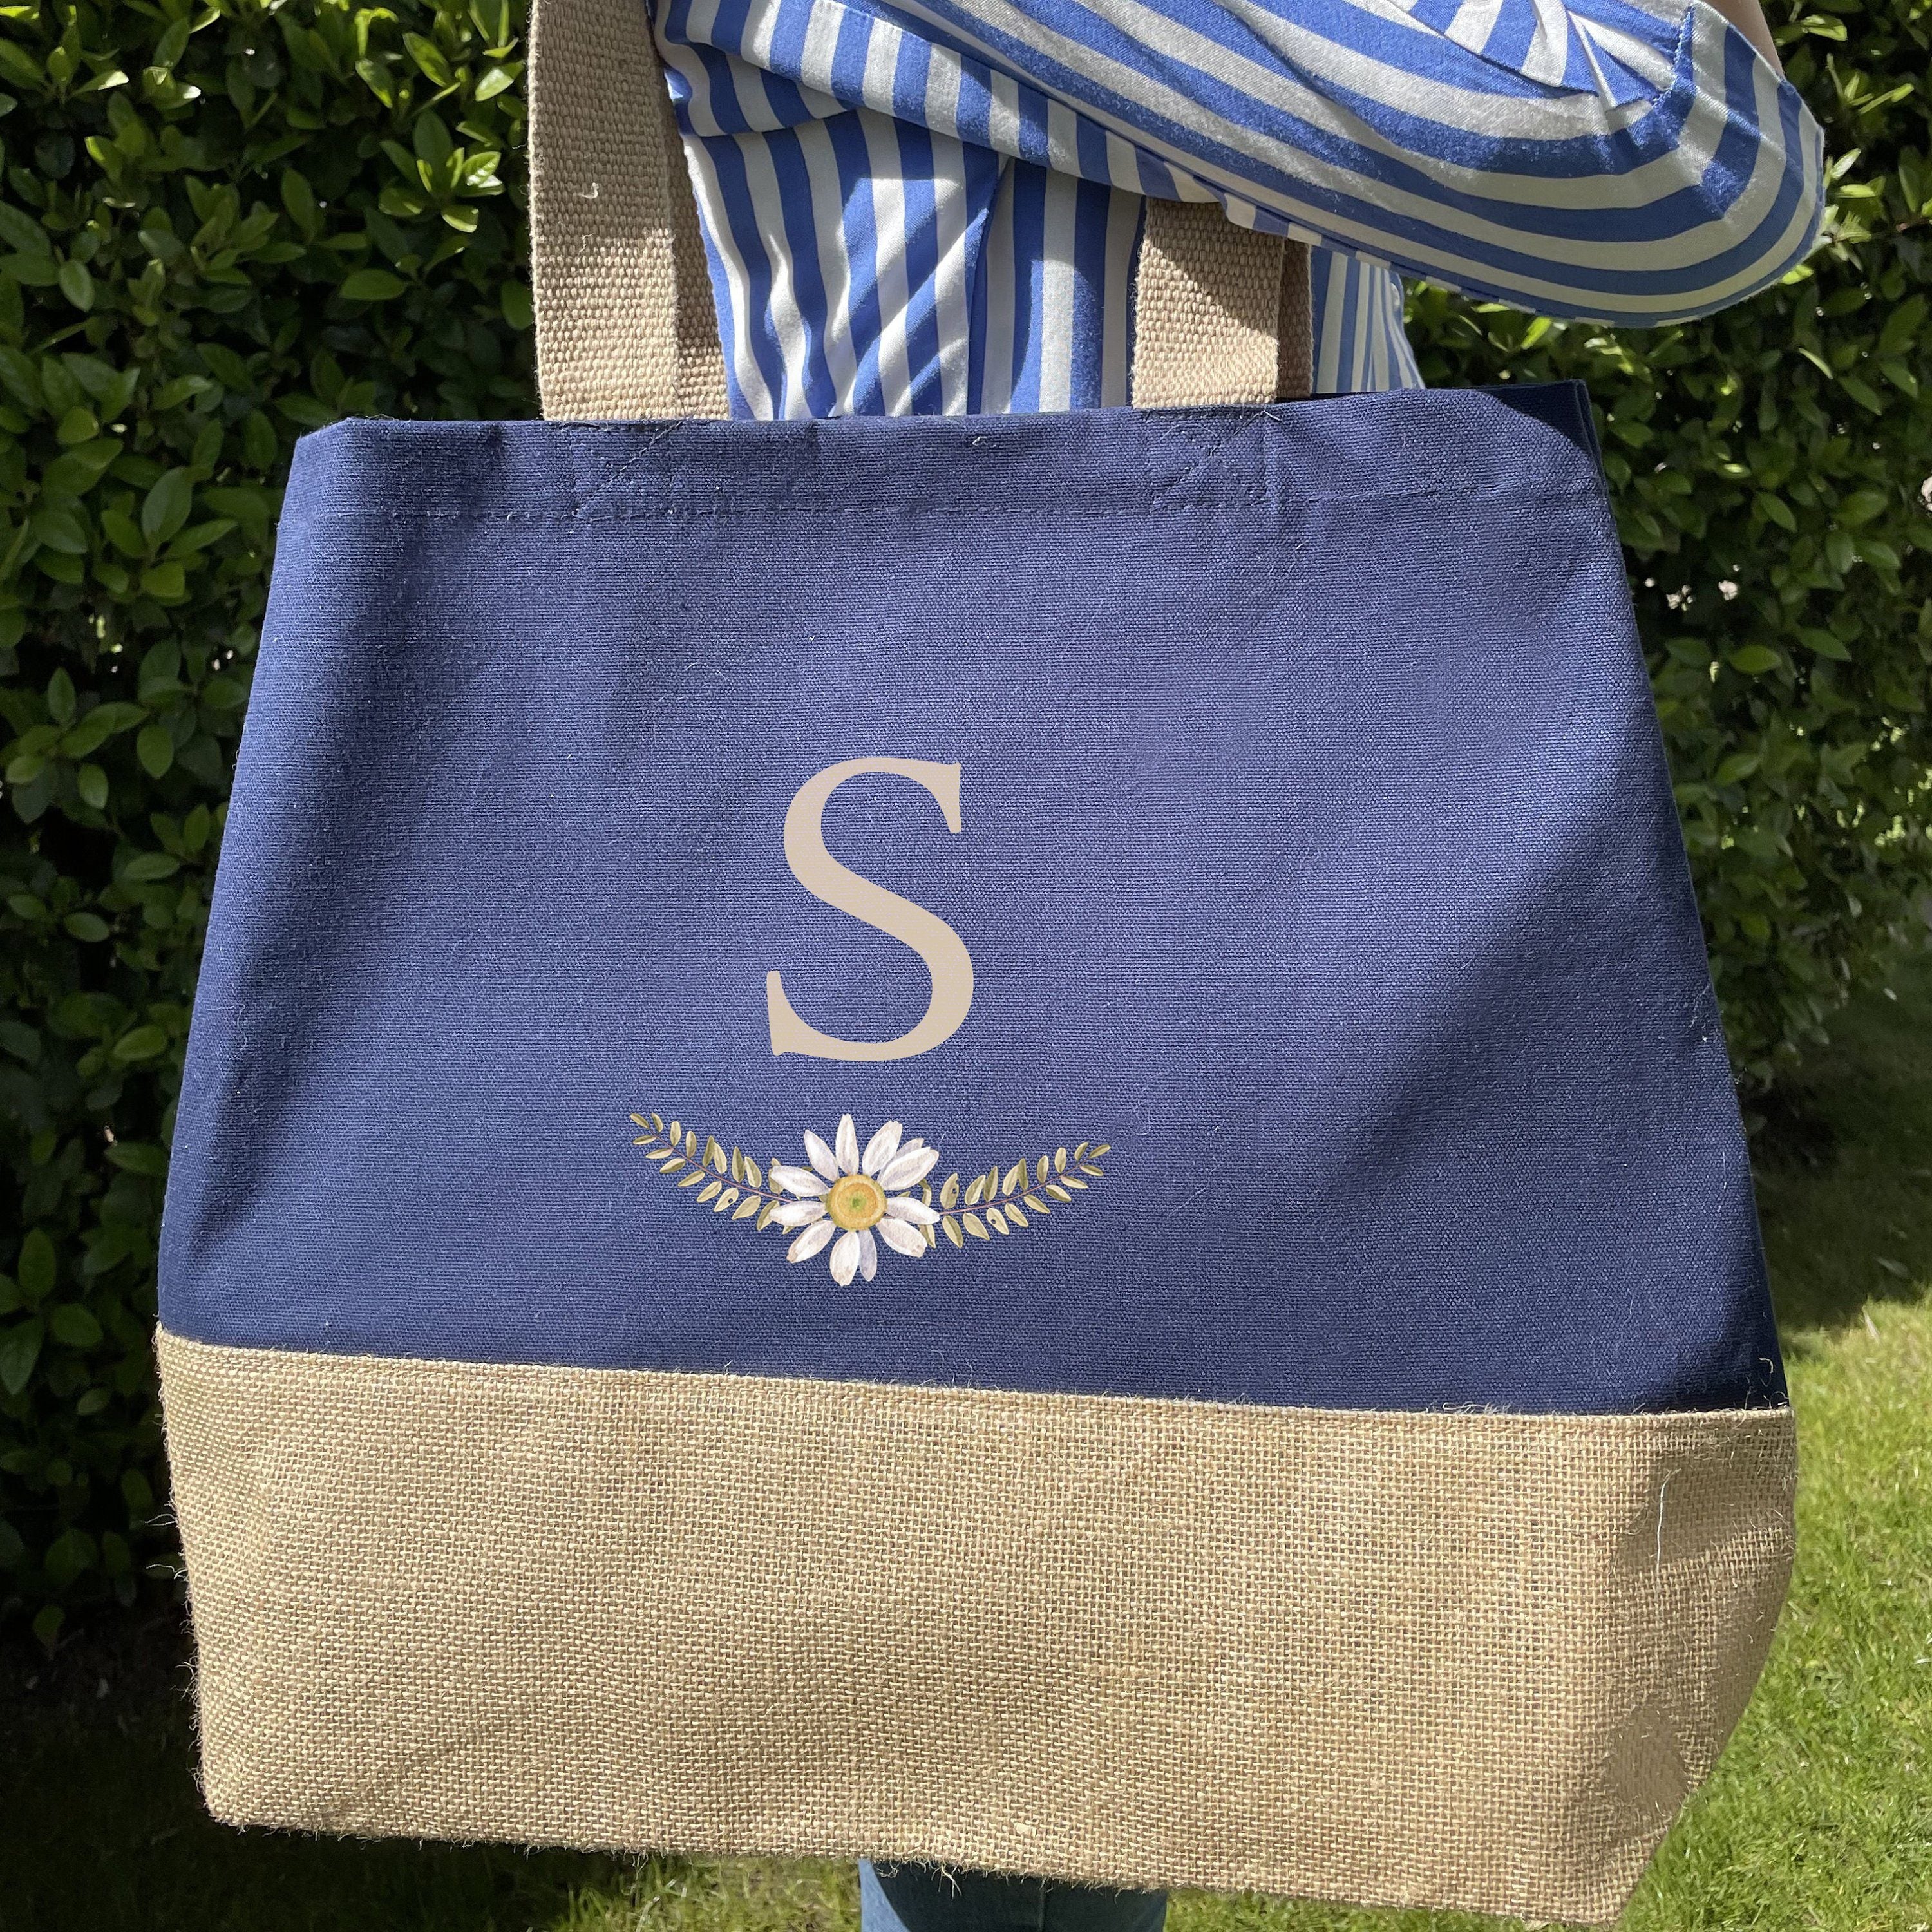 Personalised Initial tote bag, Gift for her, Mum, friend, sister, wife, aunt birthday